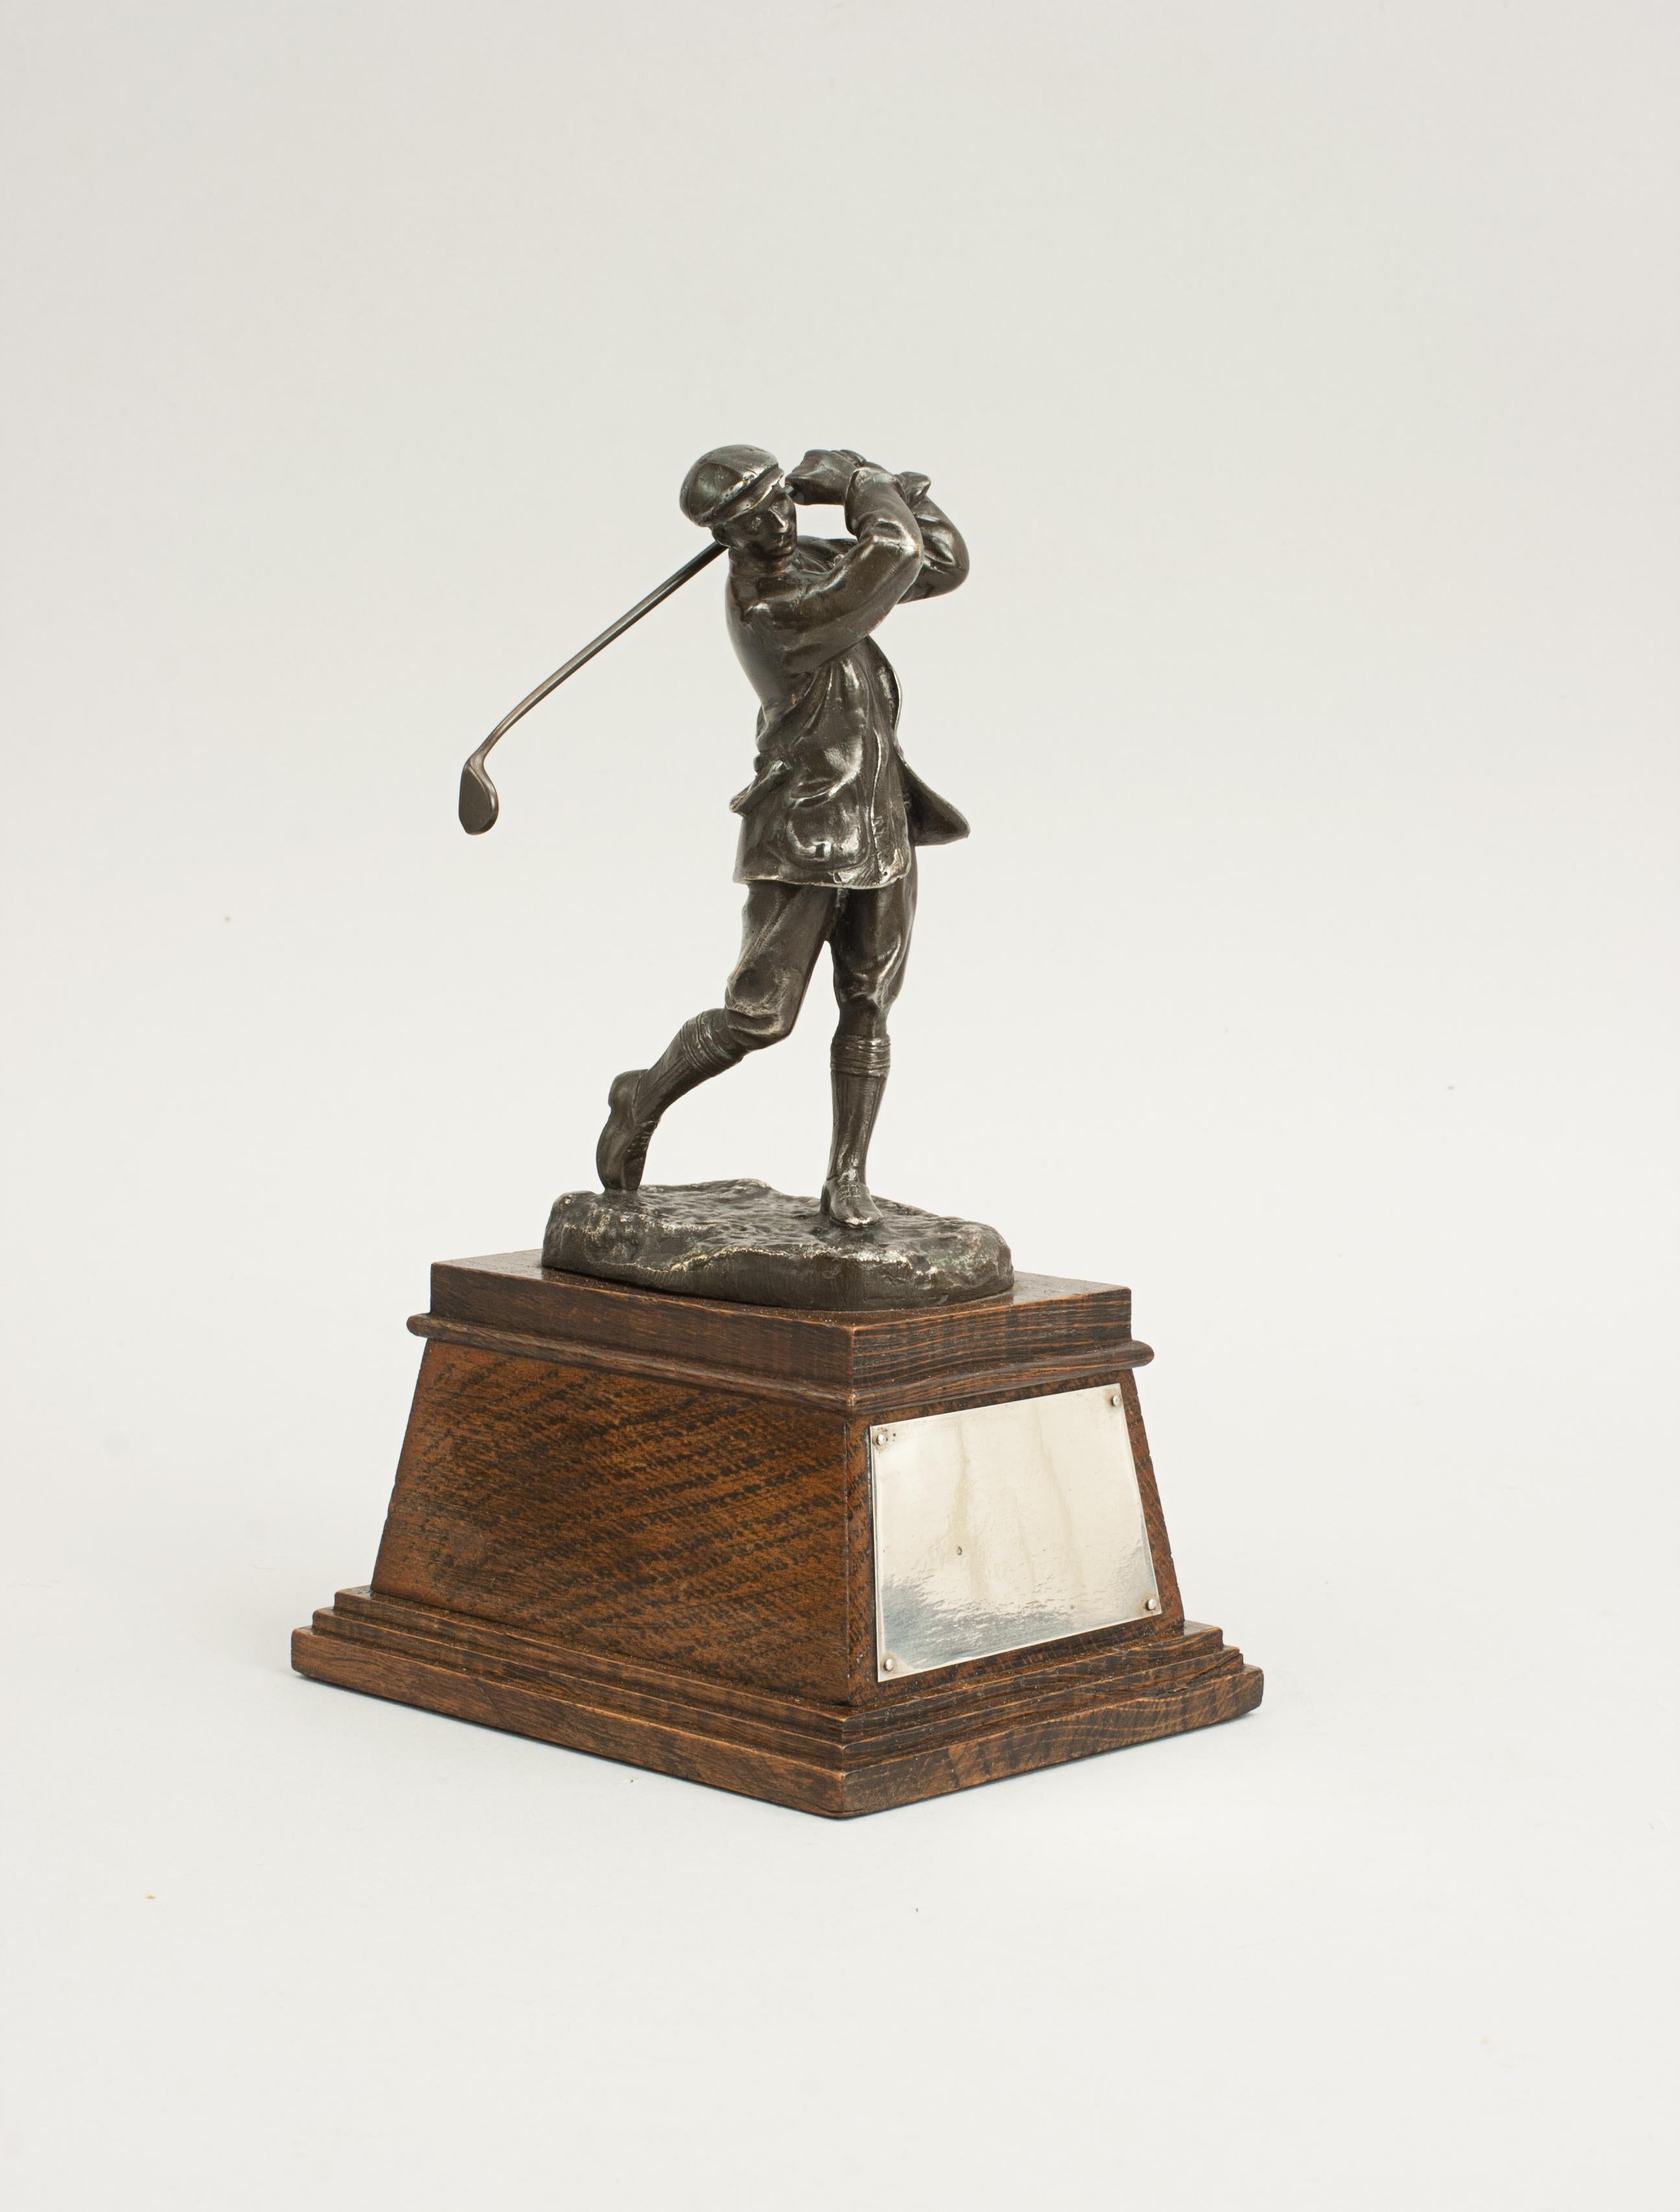 Golf Figure of Harry Vardon.
A wonderful cast figure of the Champion Golfer Harry Vardon. The figure was sculpted by Hal Ludlow and cast by the Elkington foundry. The impressive and well-known figure of Vardon is mounted on an oak plinth with